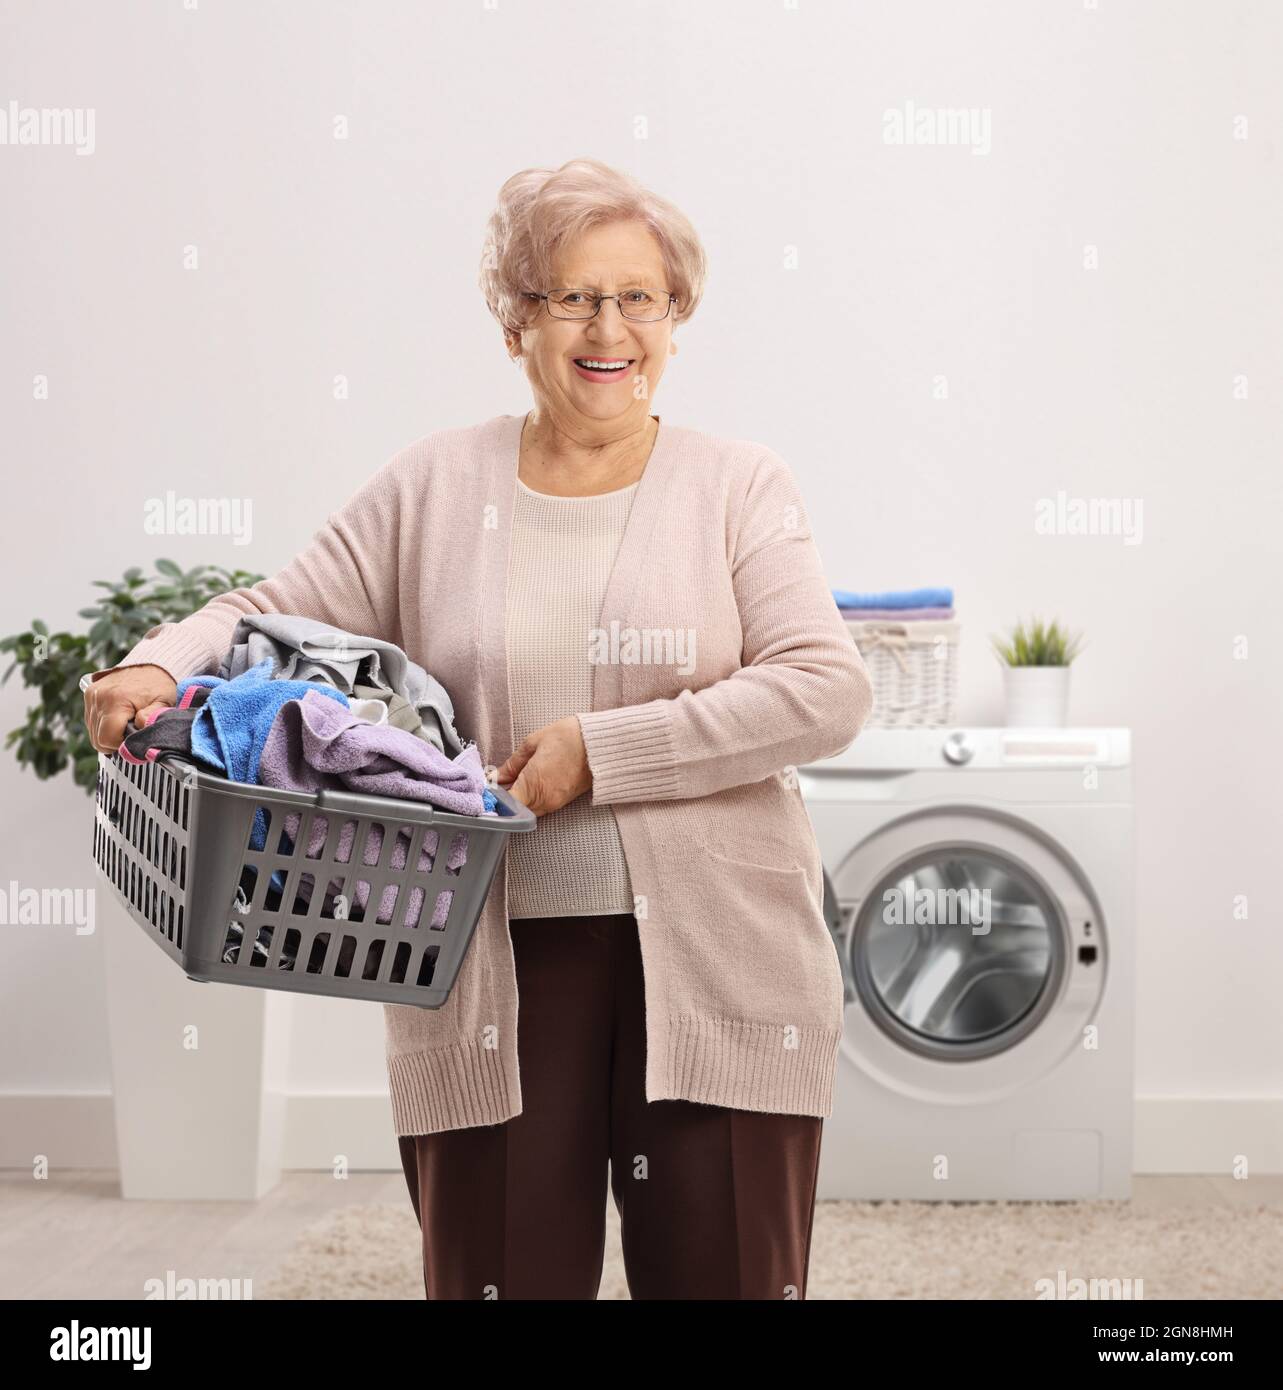 Elderly woman holding a laundry basket with clothes inside a bathroom Stock Photo